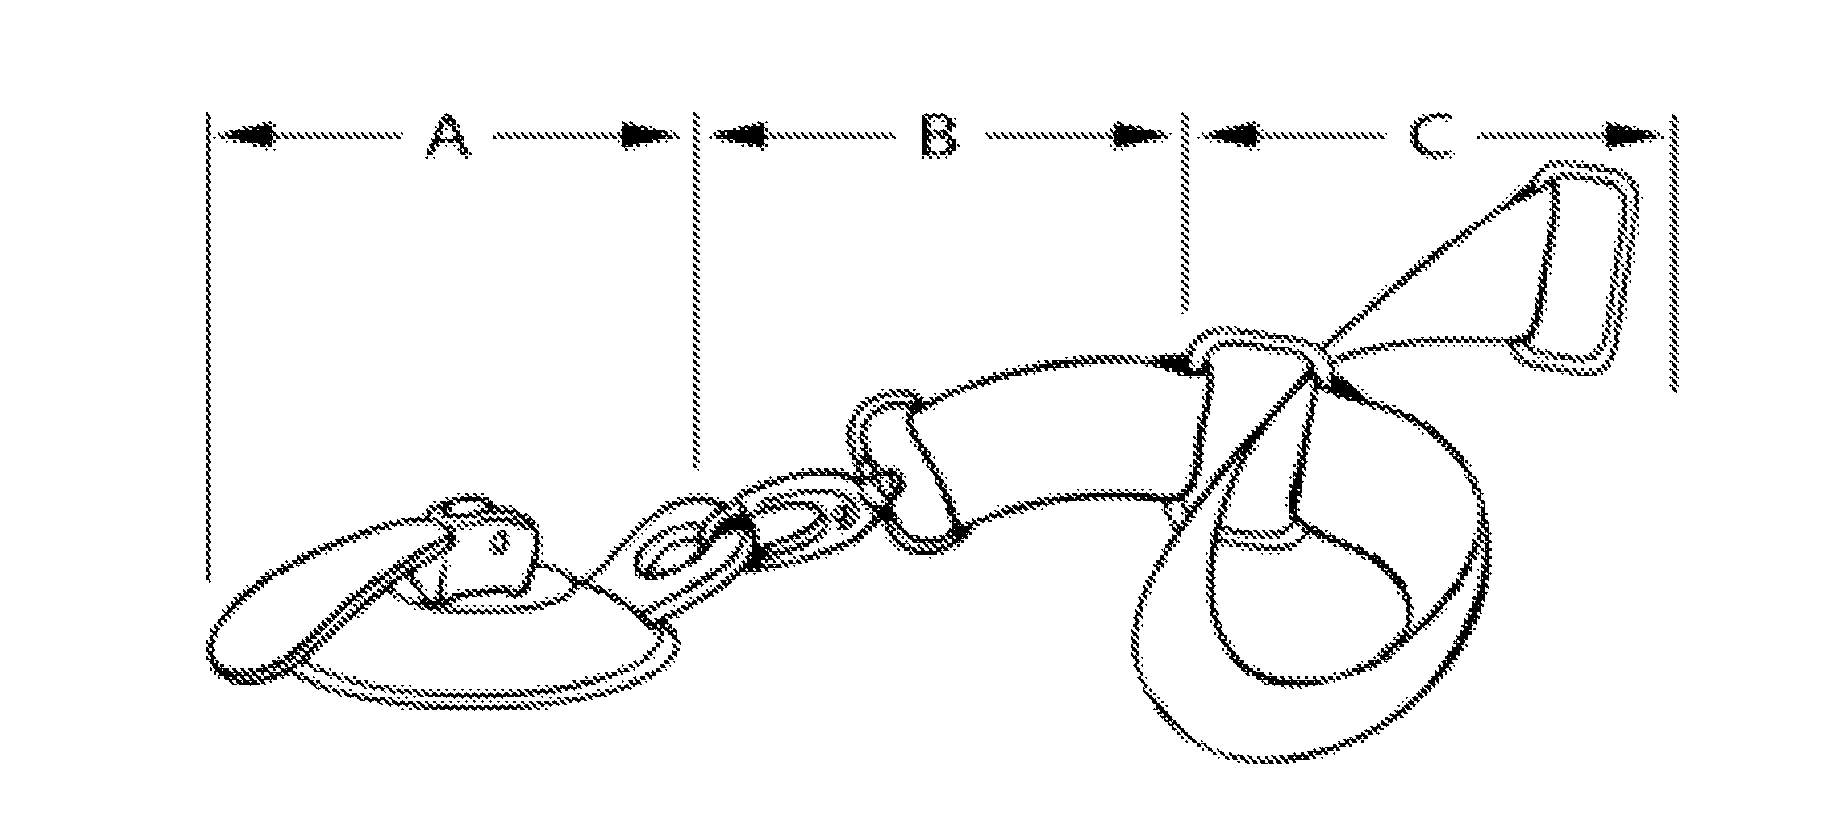 Pet leg restraining device during bathing, grooming, nail clipping, and exams